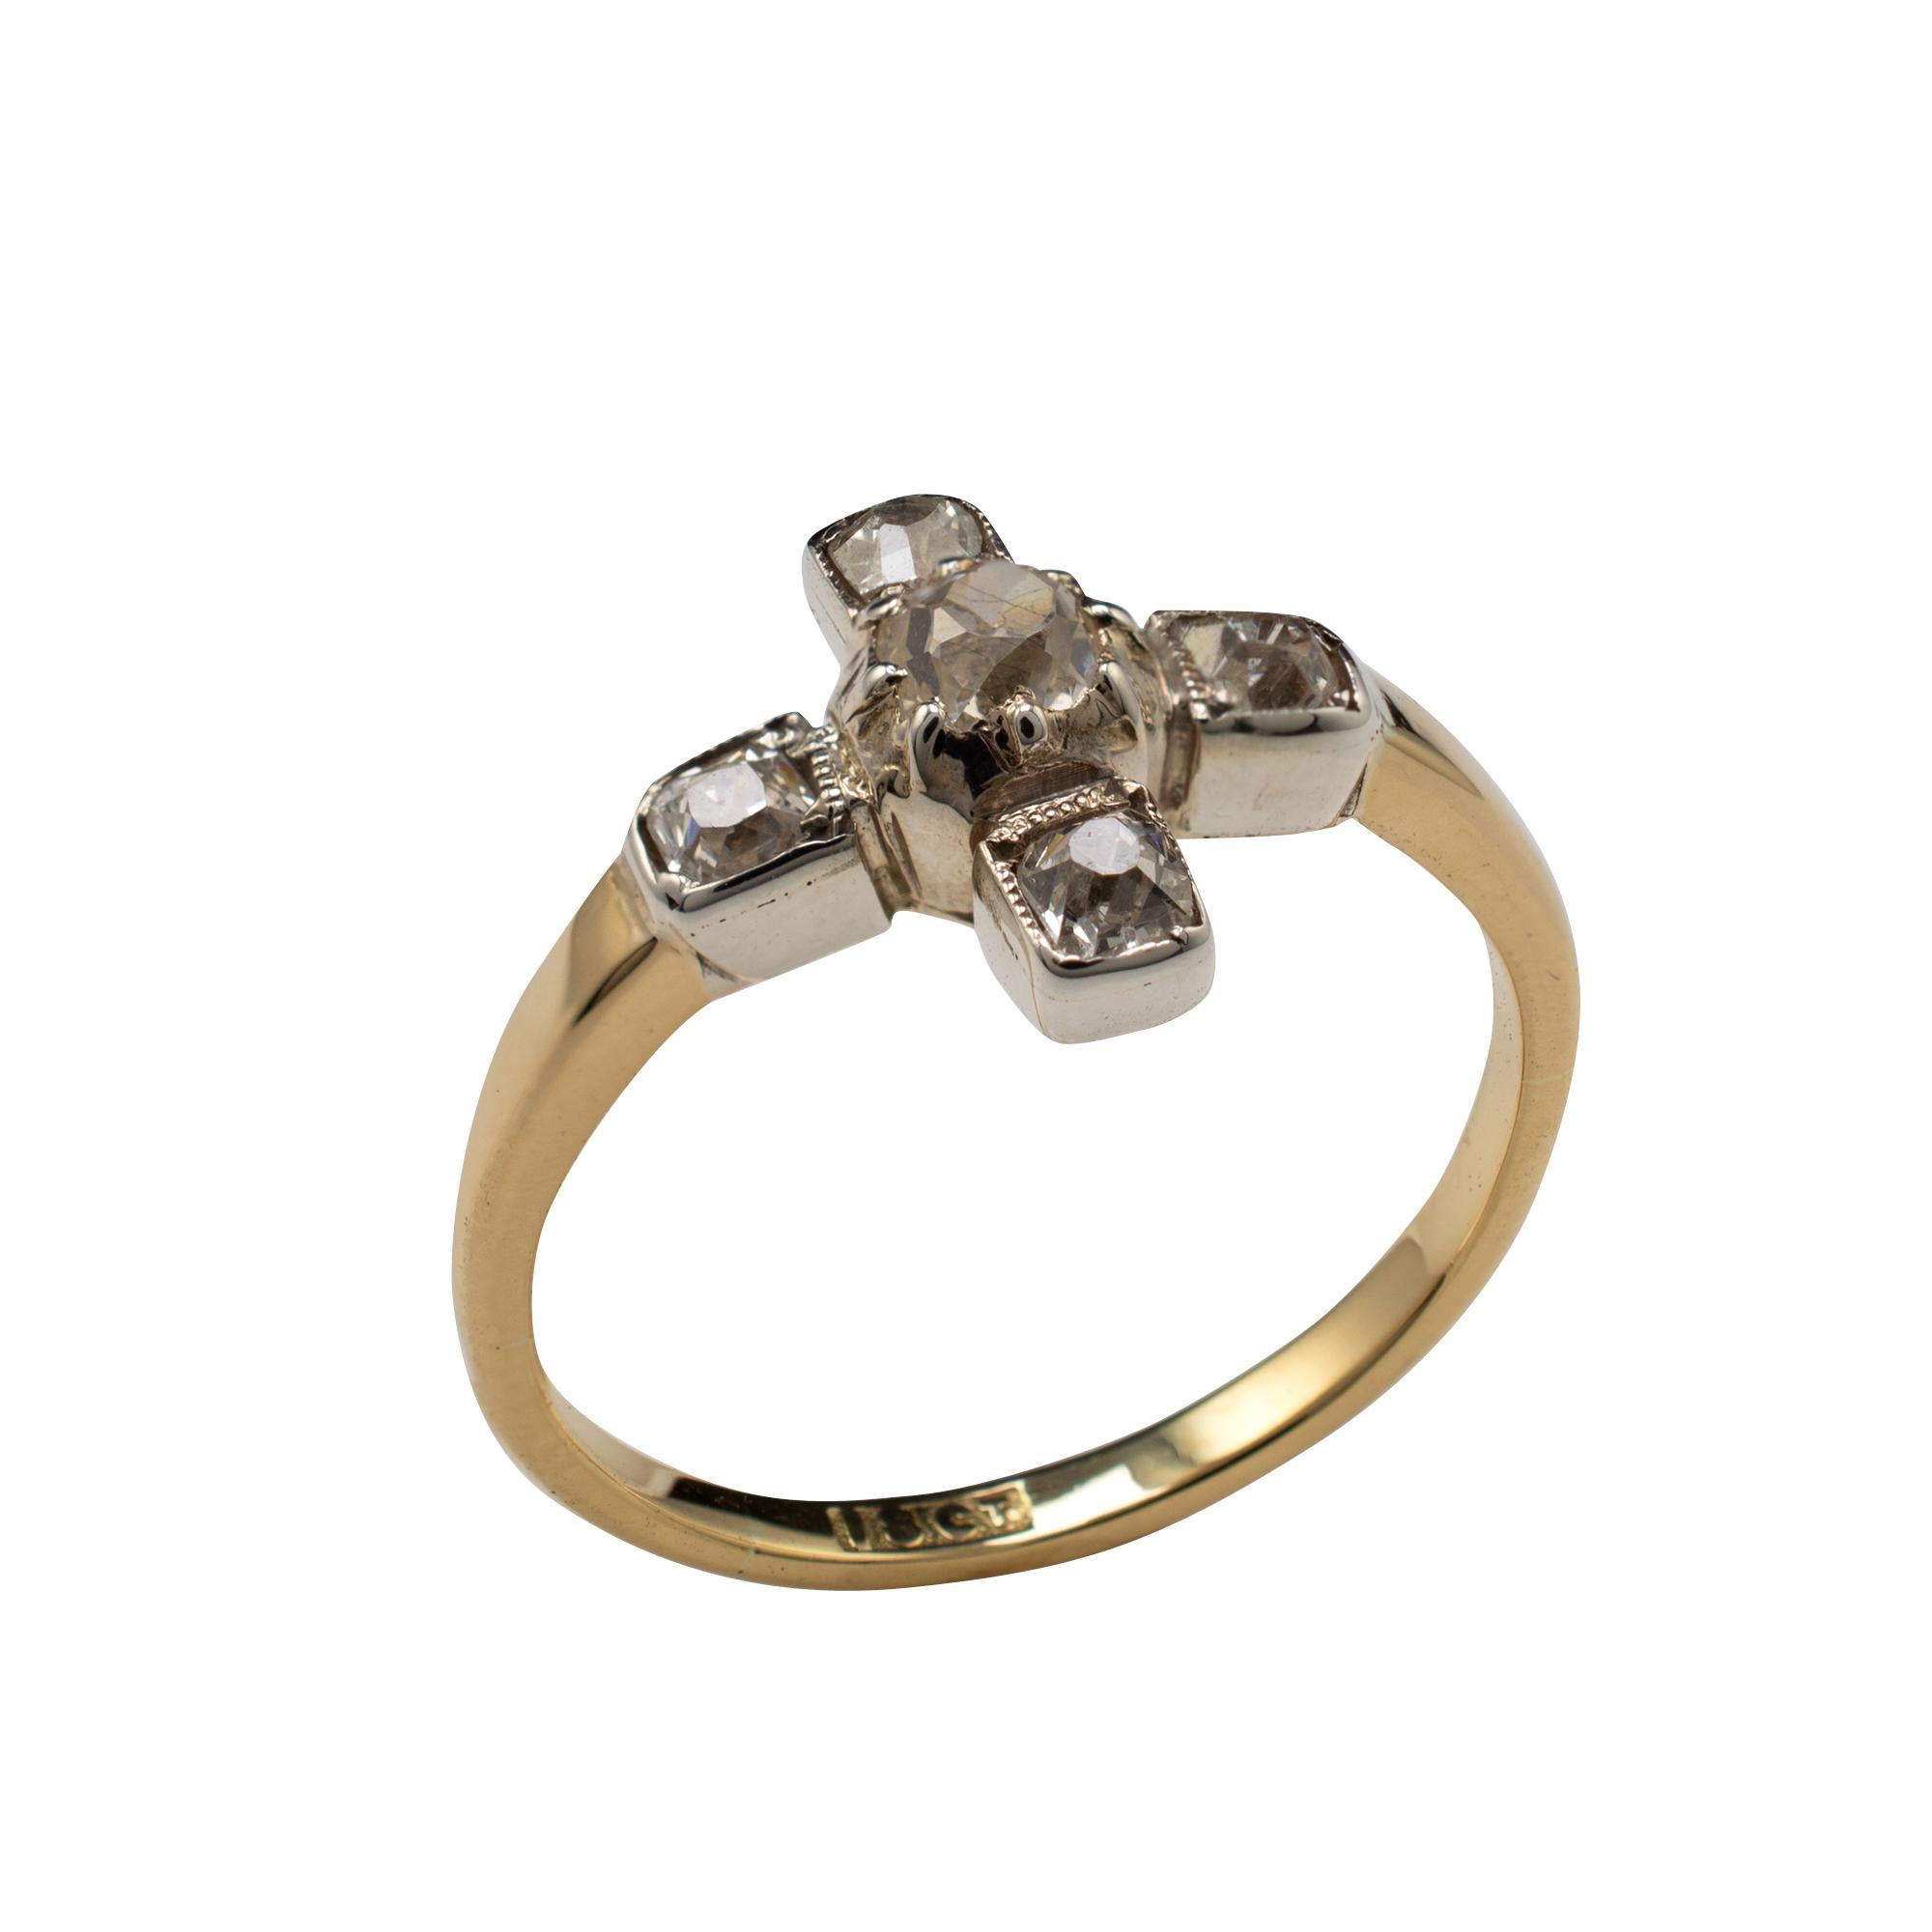 This Art Deco diamond ring, crafted in 18 karat gold, is presented in lovely condition with fabulous quality old cut diamonds. 

The white gold setting displays a claw set 0.18-carat old cut diamond to the center with 4 smaller old cut diamonds, set